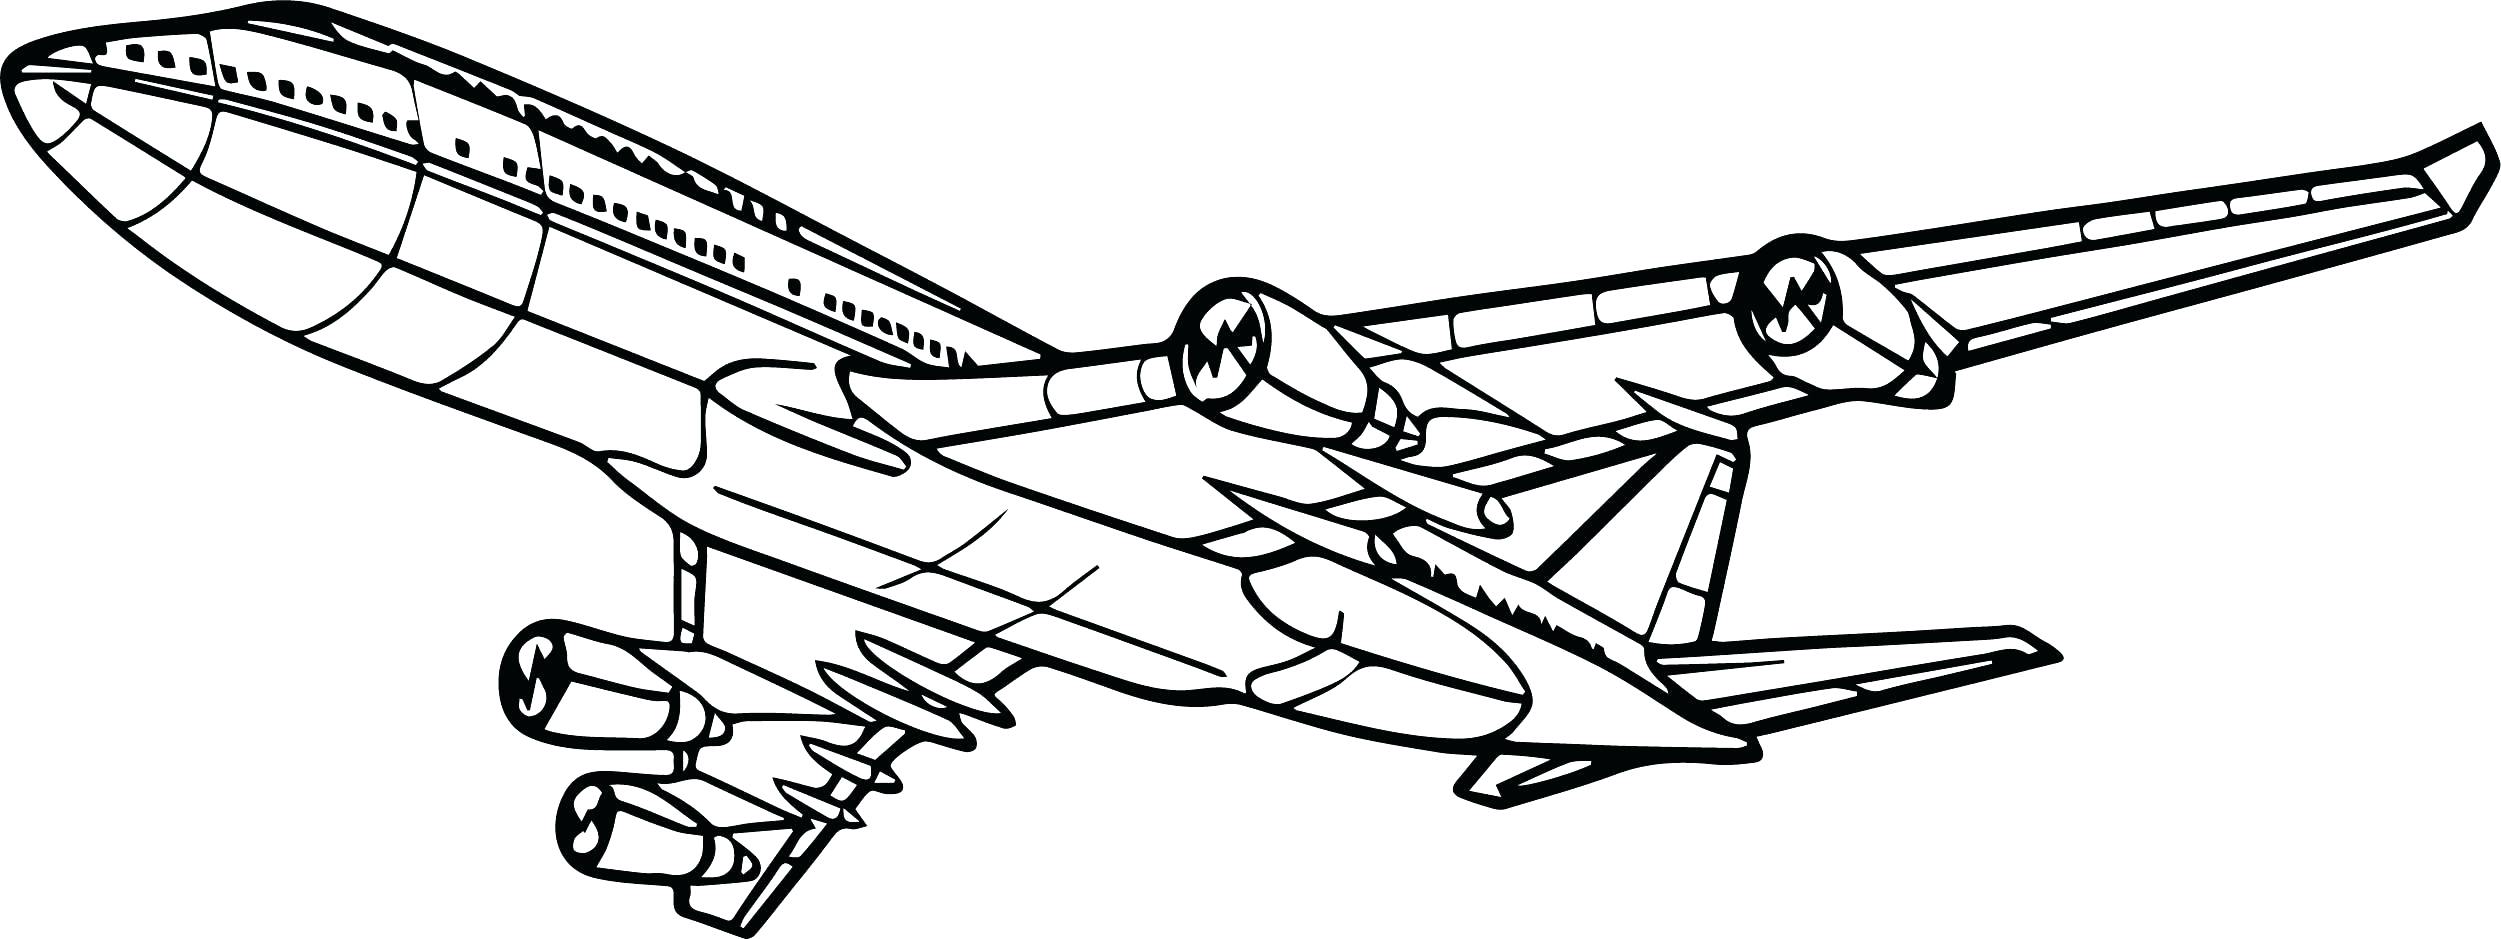 Airplane Coloring Pages For Preschool at GetDrawings | Free download